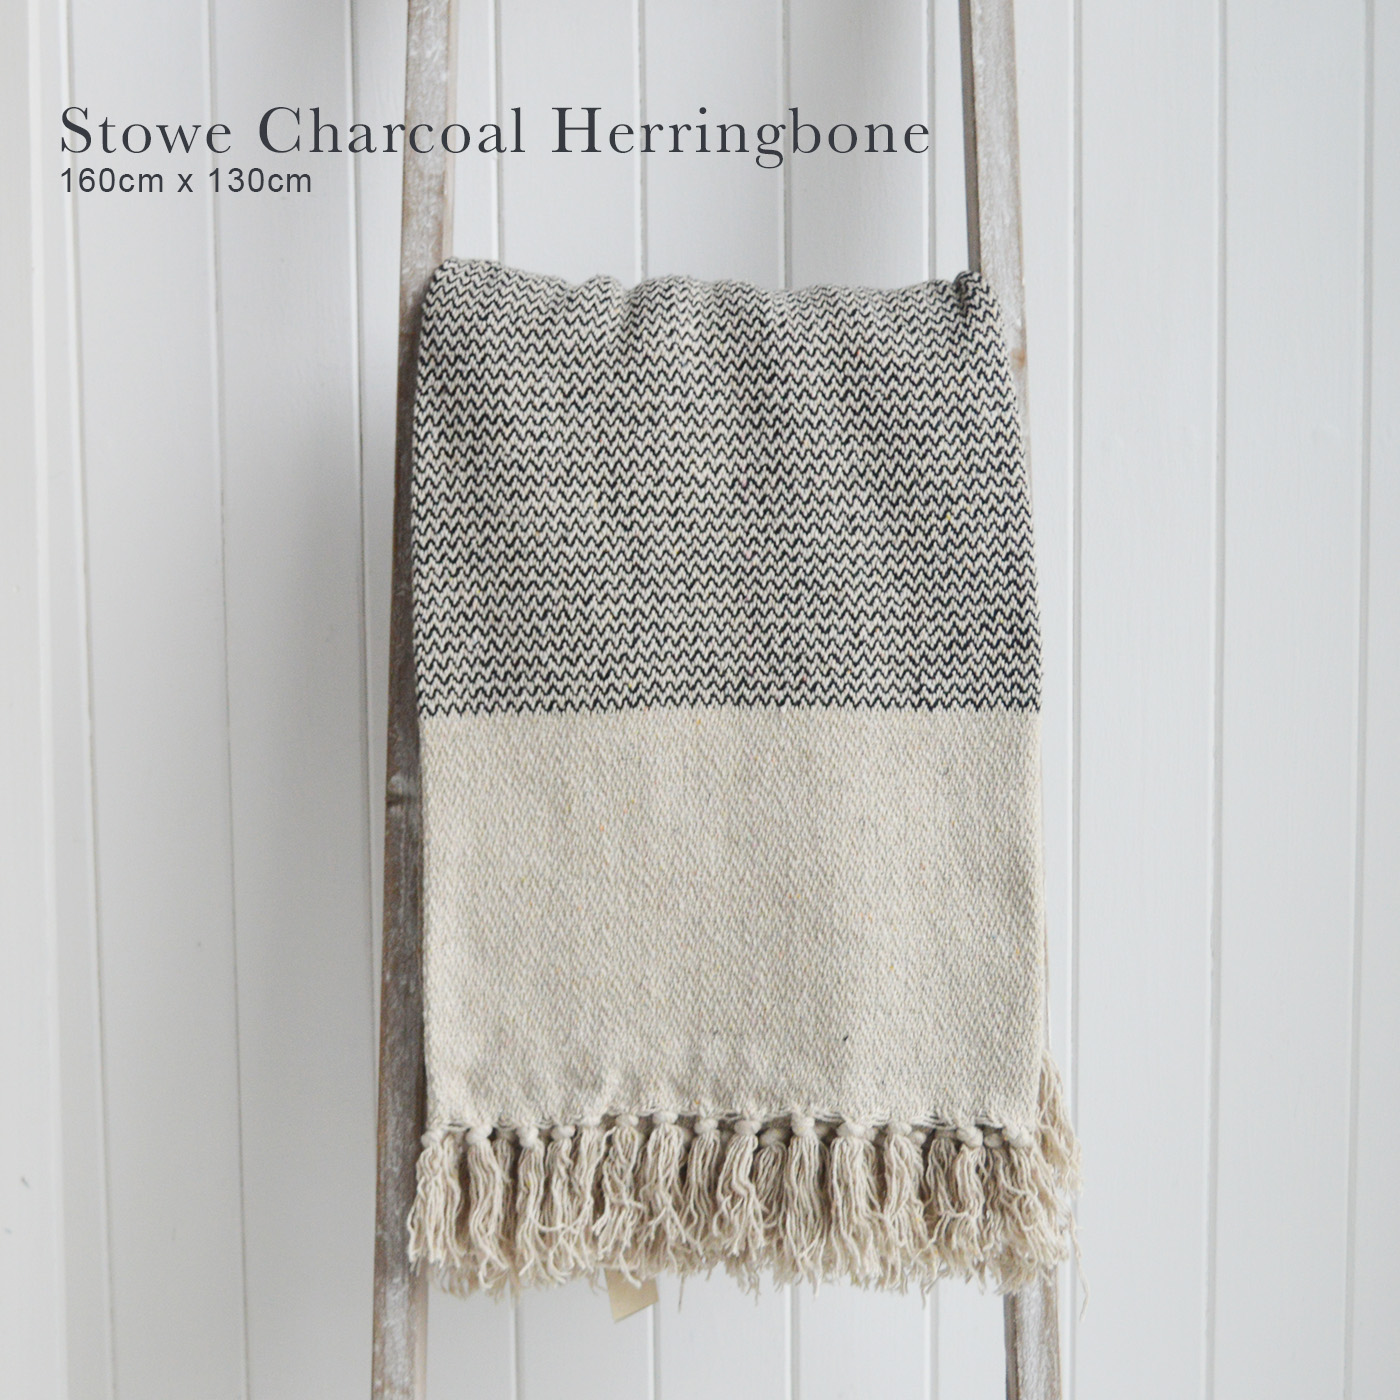 Stowe throws in blues, greys and natural coloures  for interiors in New England styles modern farmhouse, country, coastal and city homes - Charcoal Herringbone